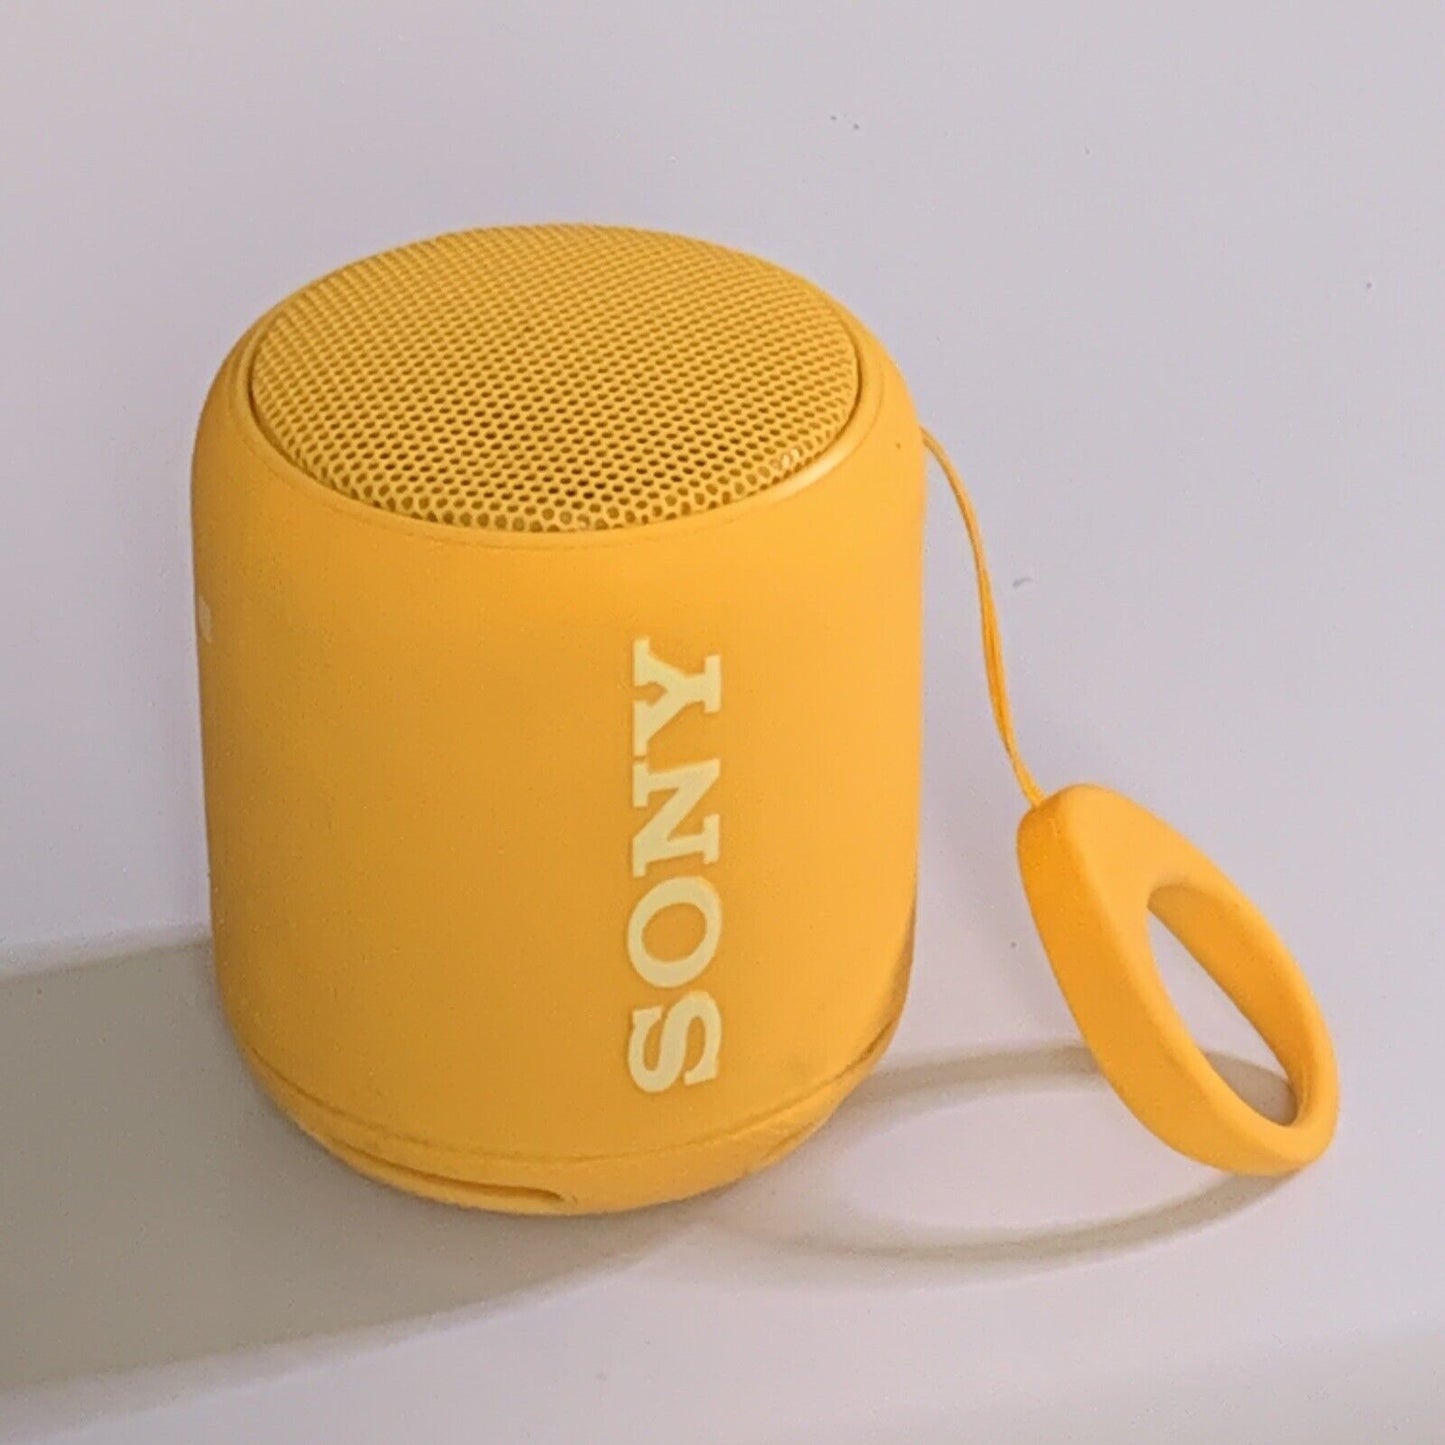 Sony SRS-XB10 Bluetooth Speaker Extra Bass Boost Water Resistant Yellow